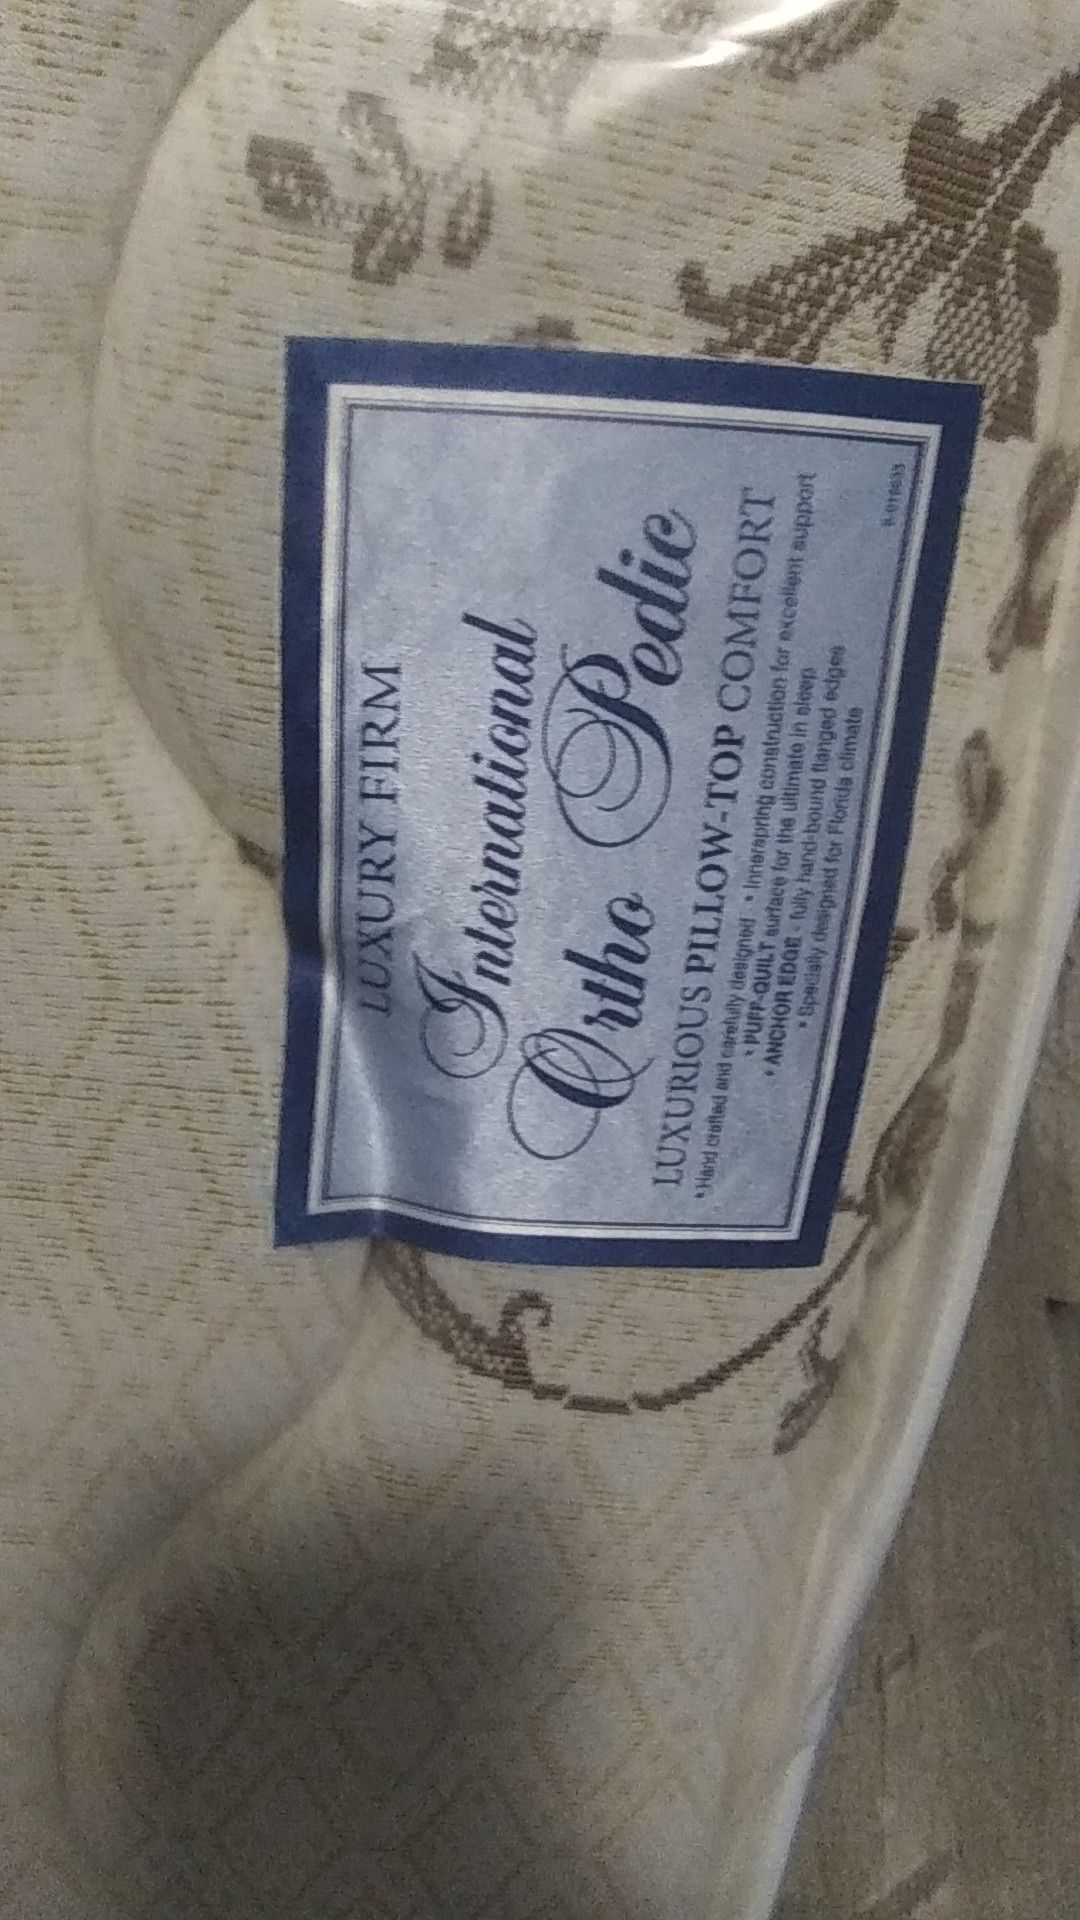 twin and queen bedsets box spring, mattress and frames. twin 150 queen 200 obo